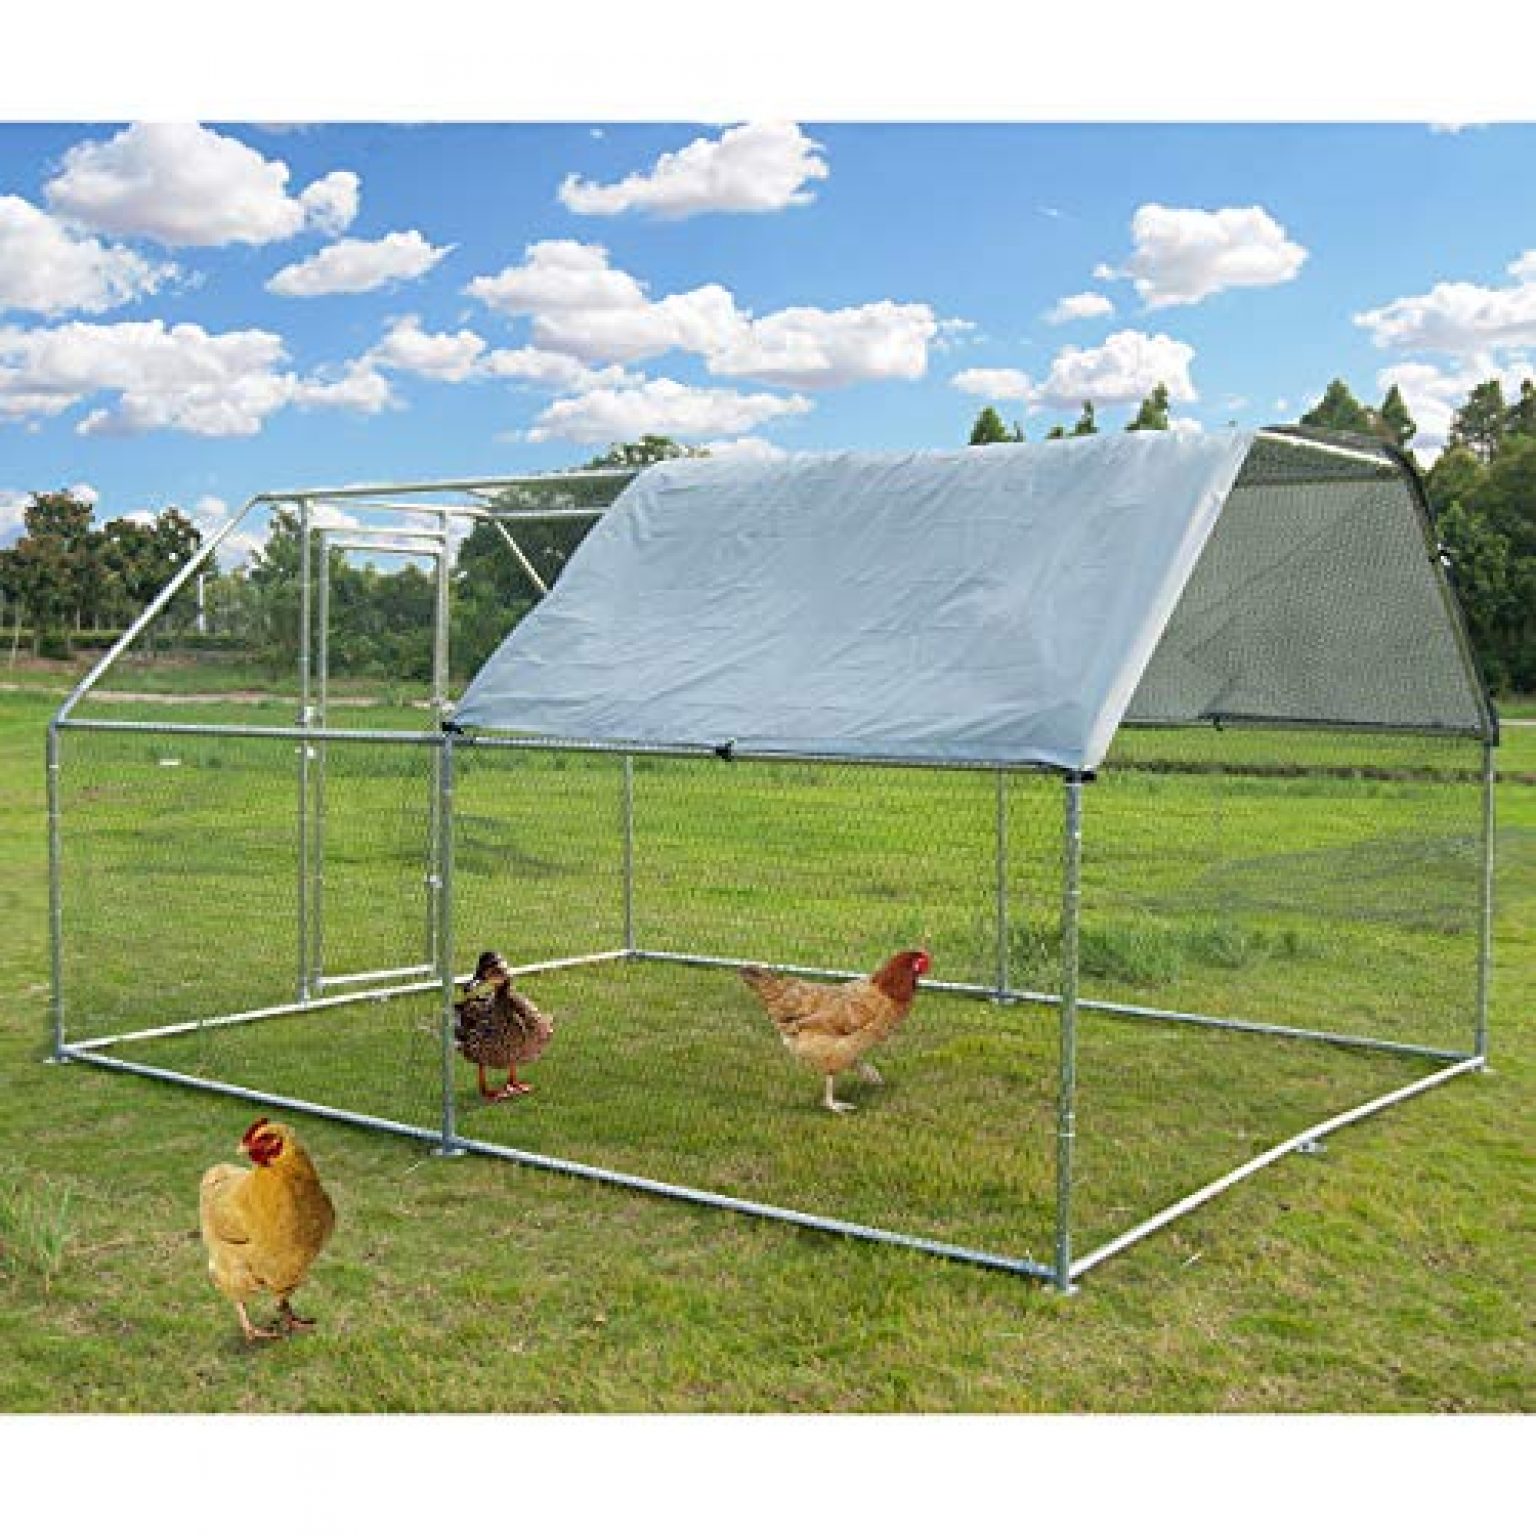 Large Metal Chicken Coop Walk-in Poultry Cage Hen Run House Rabbits ...